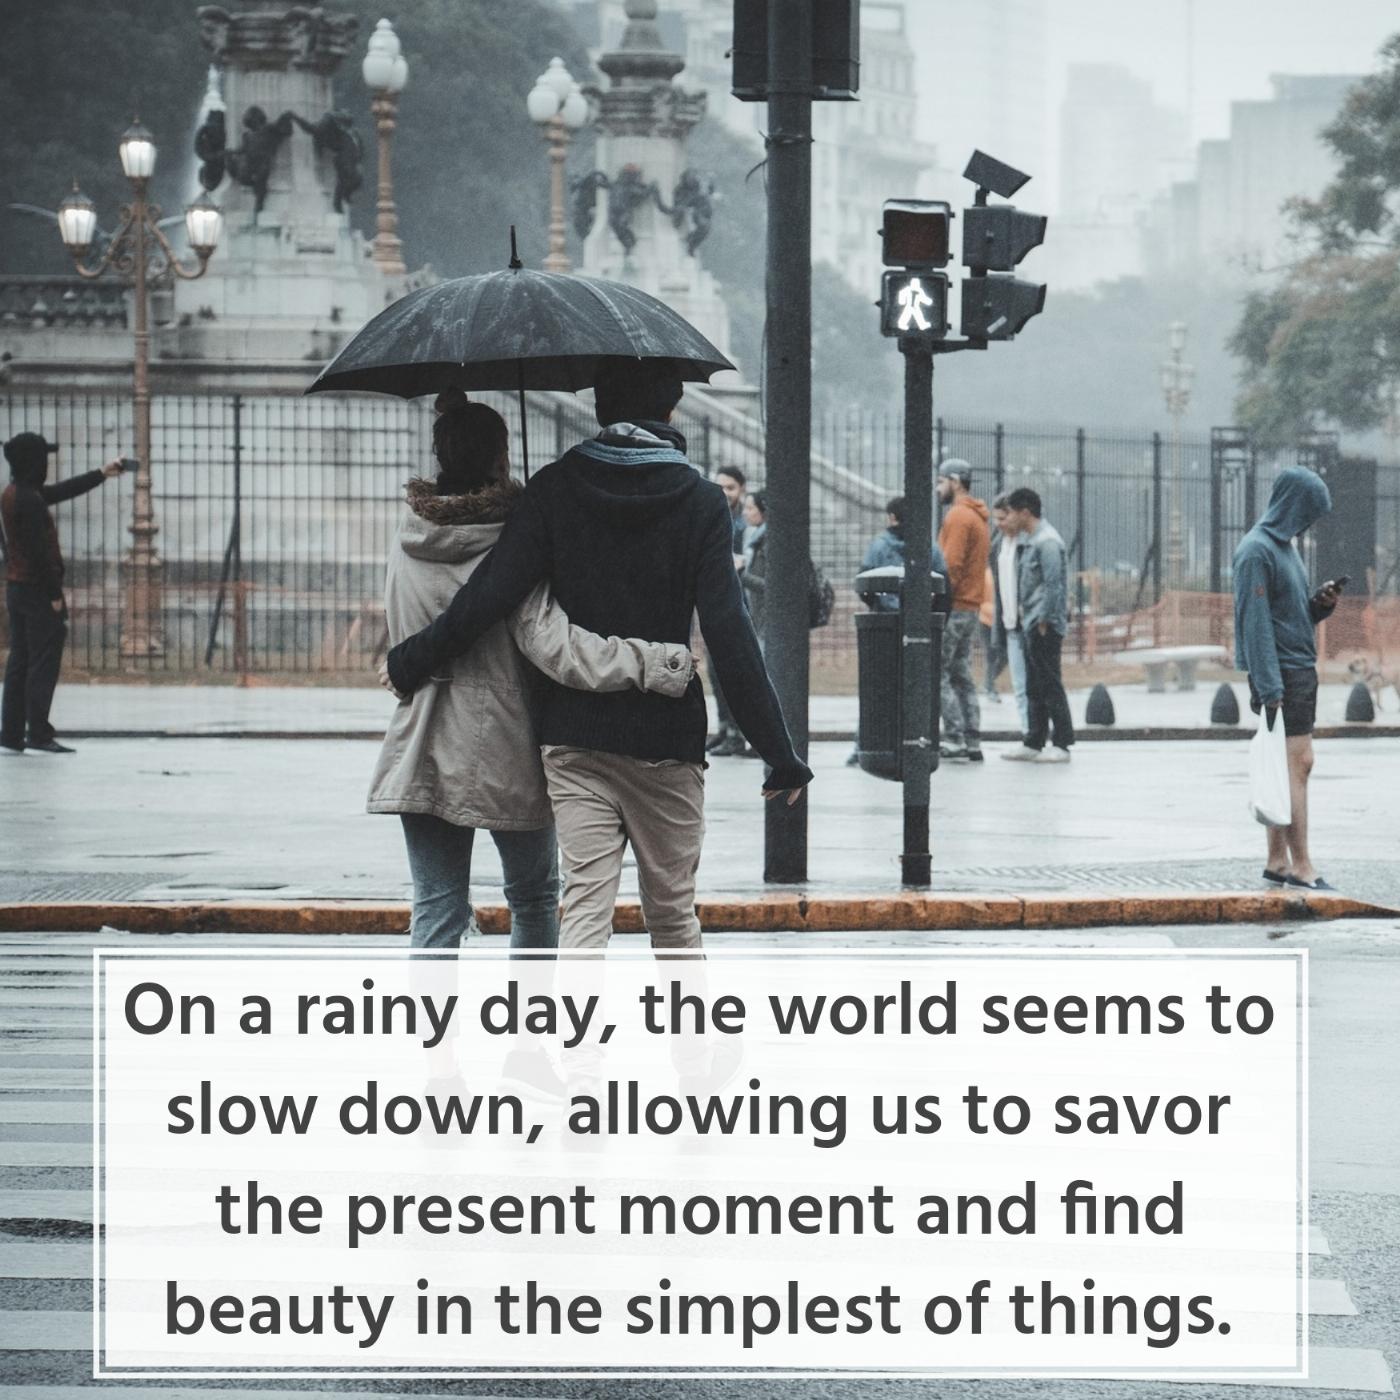 On a rainy day the world seems to slow down